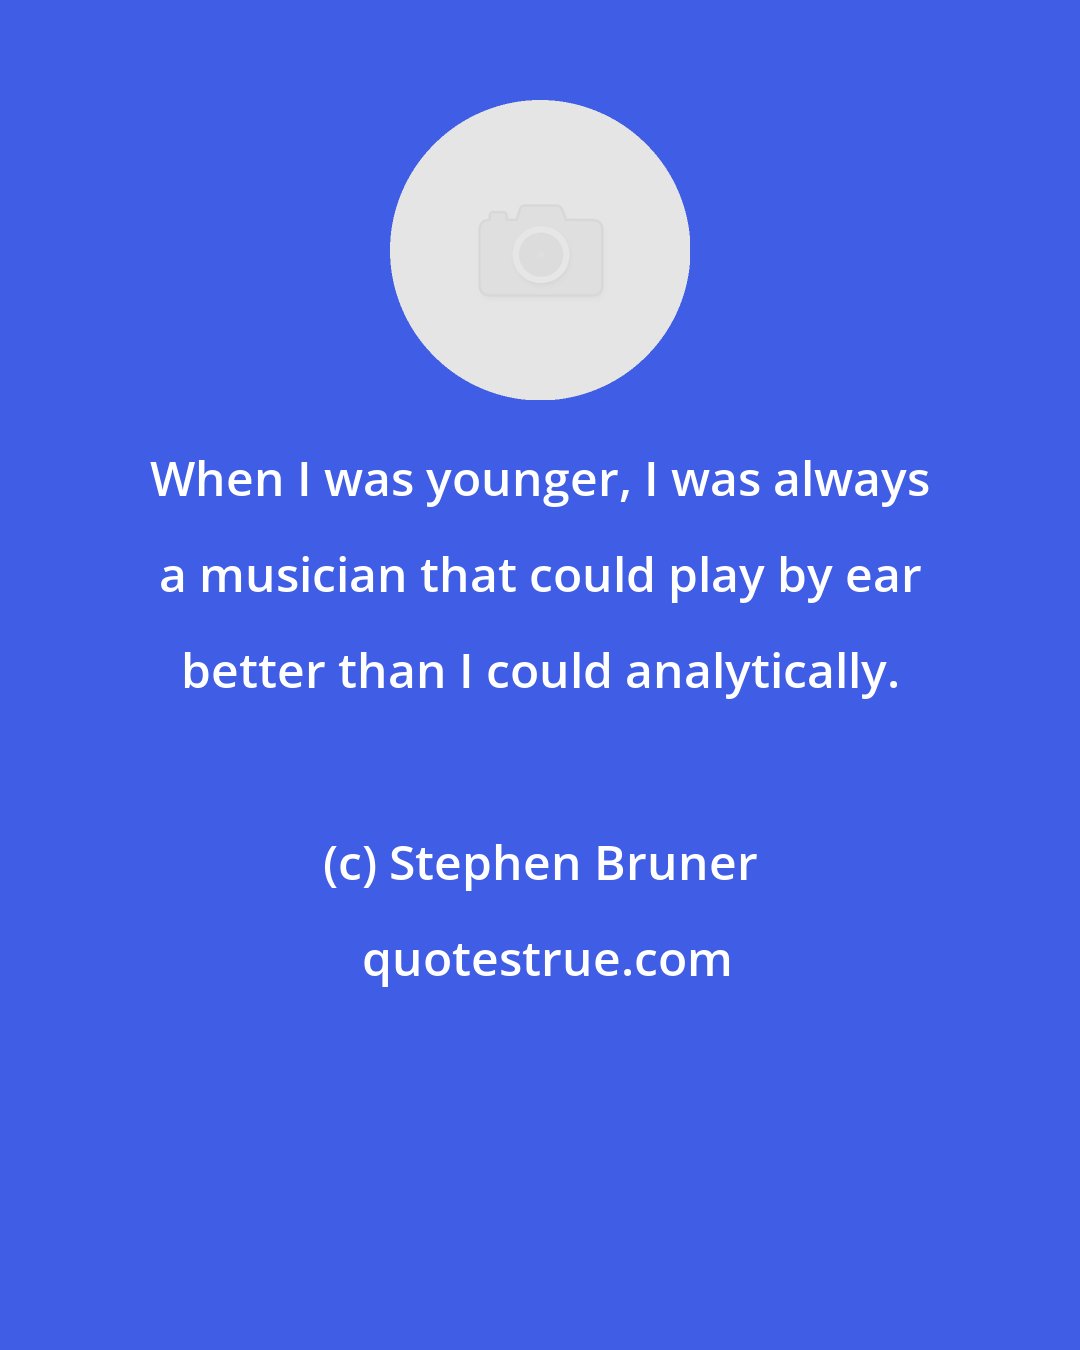 Stephen Bruner: When I was younger, I was always a musician that could play by ear better than I could analytically.